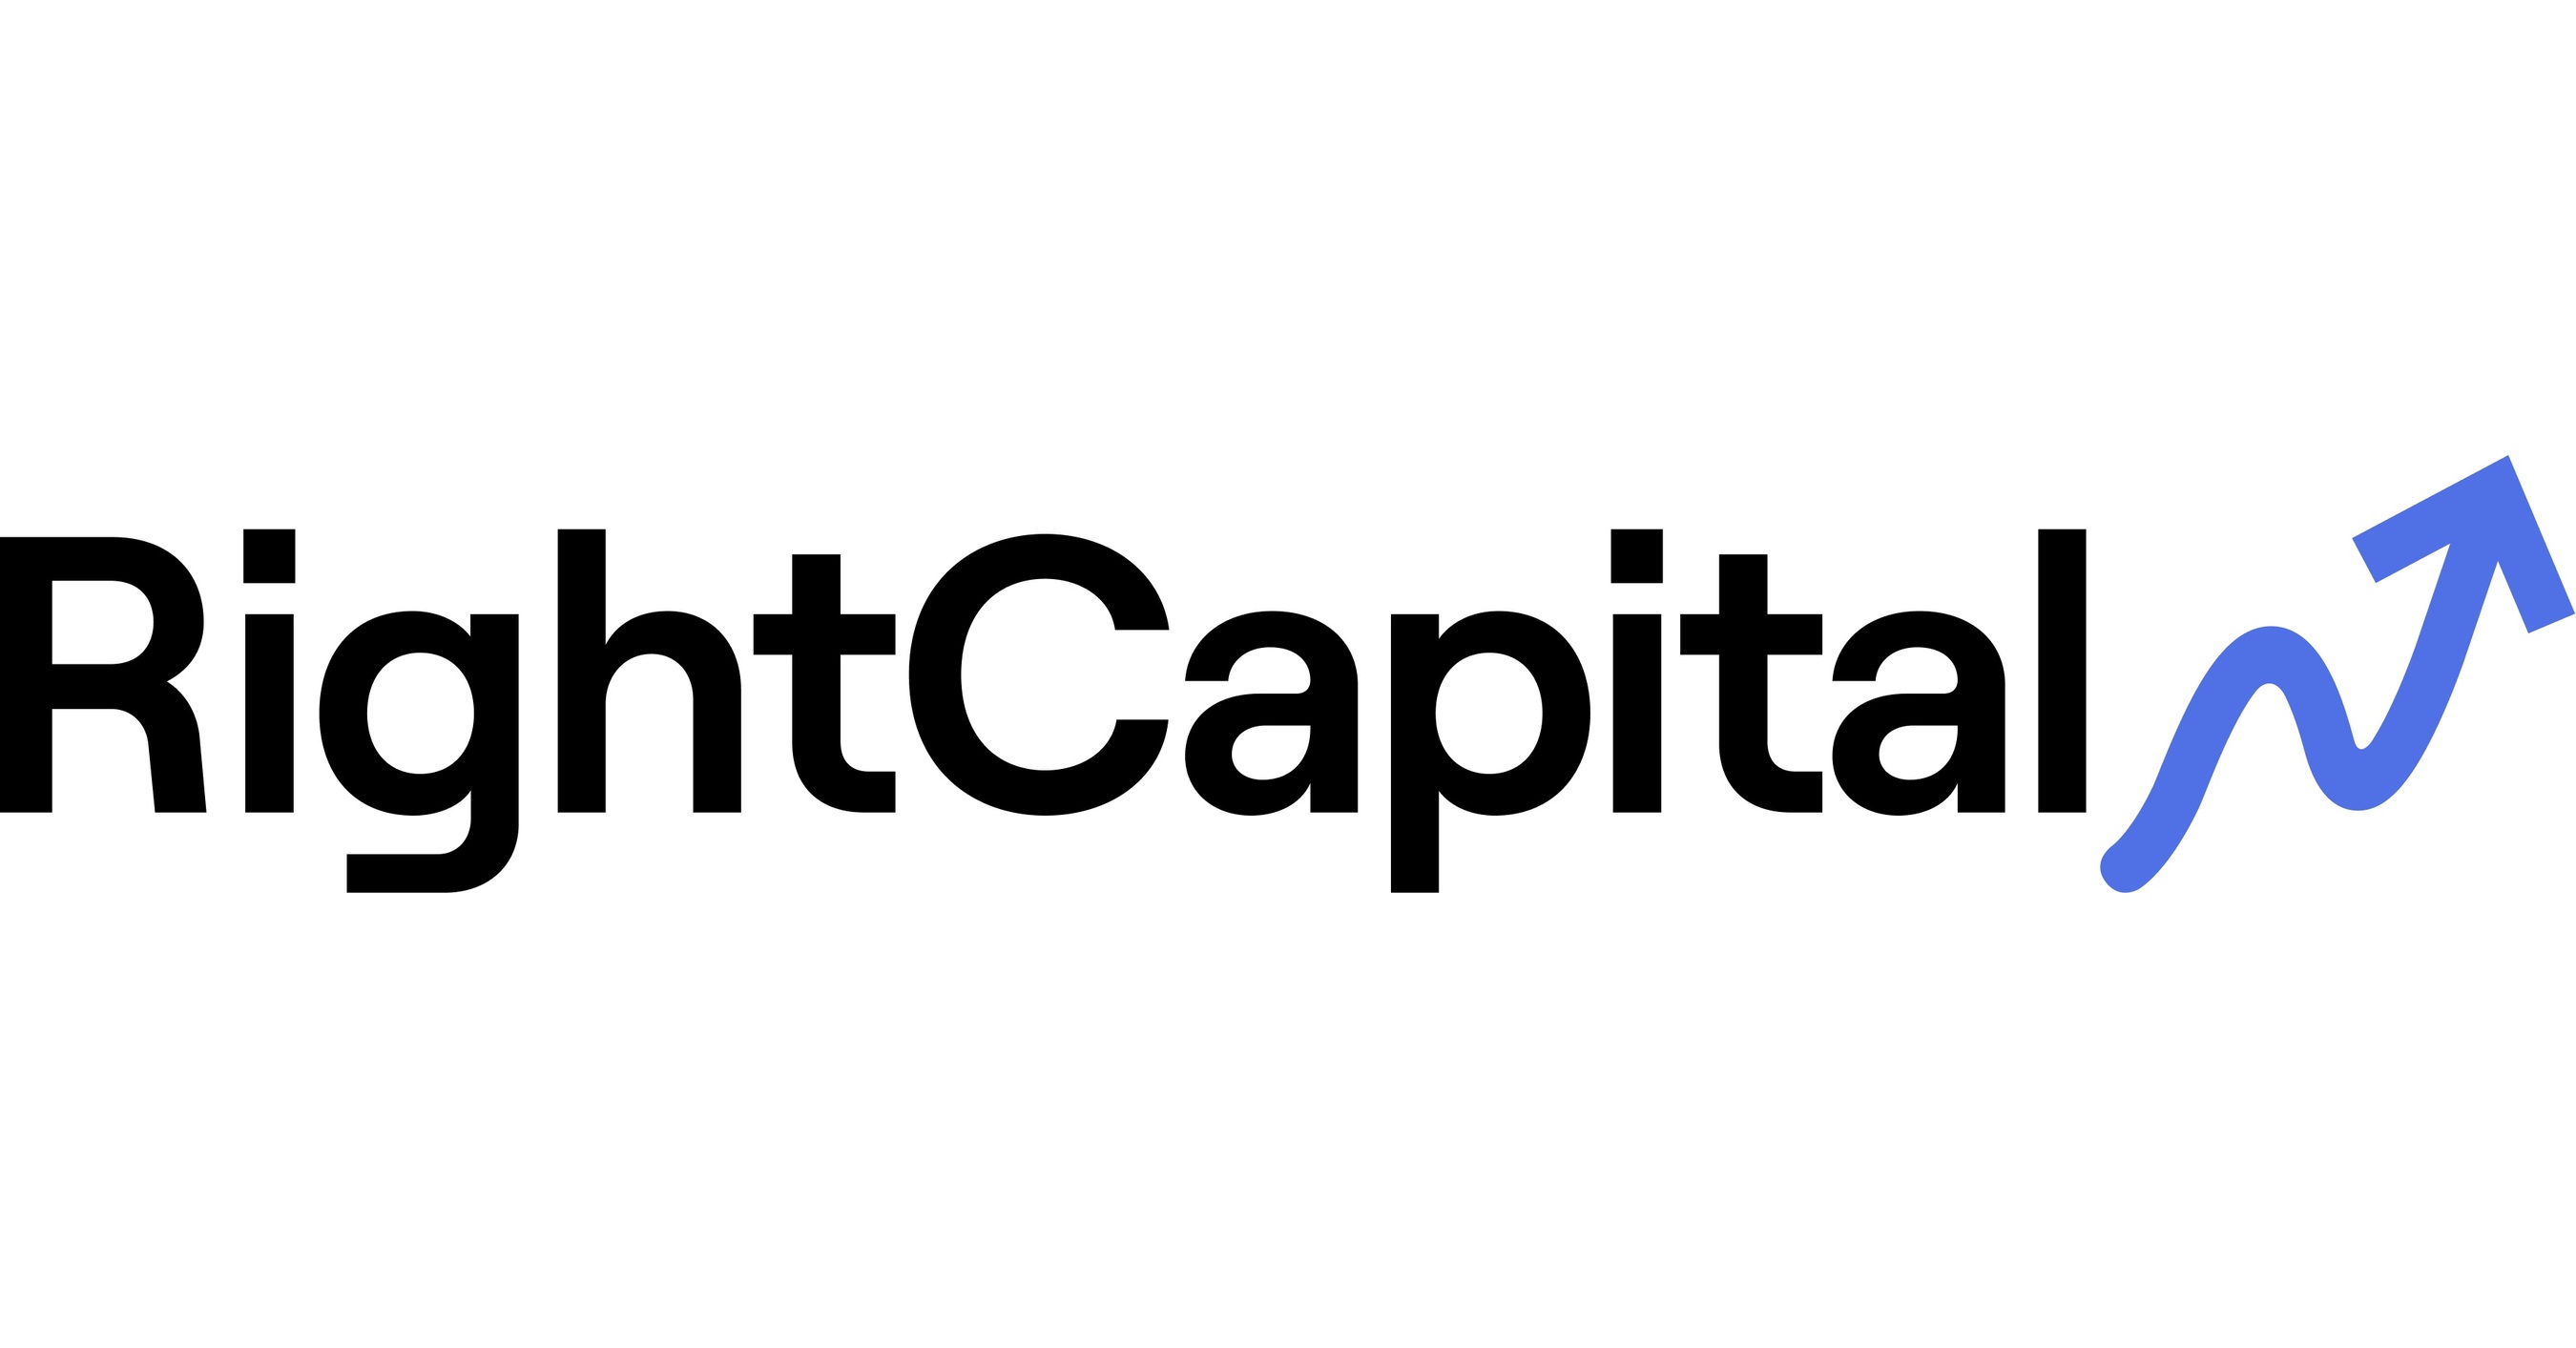 RightCapital Adds SECURE Act 2.0 Updates to its Leading Financial Planning Software Platform for Financial Advisors